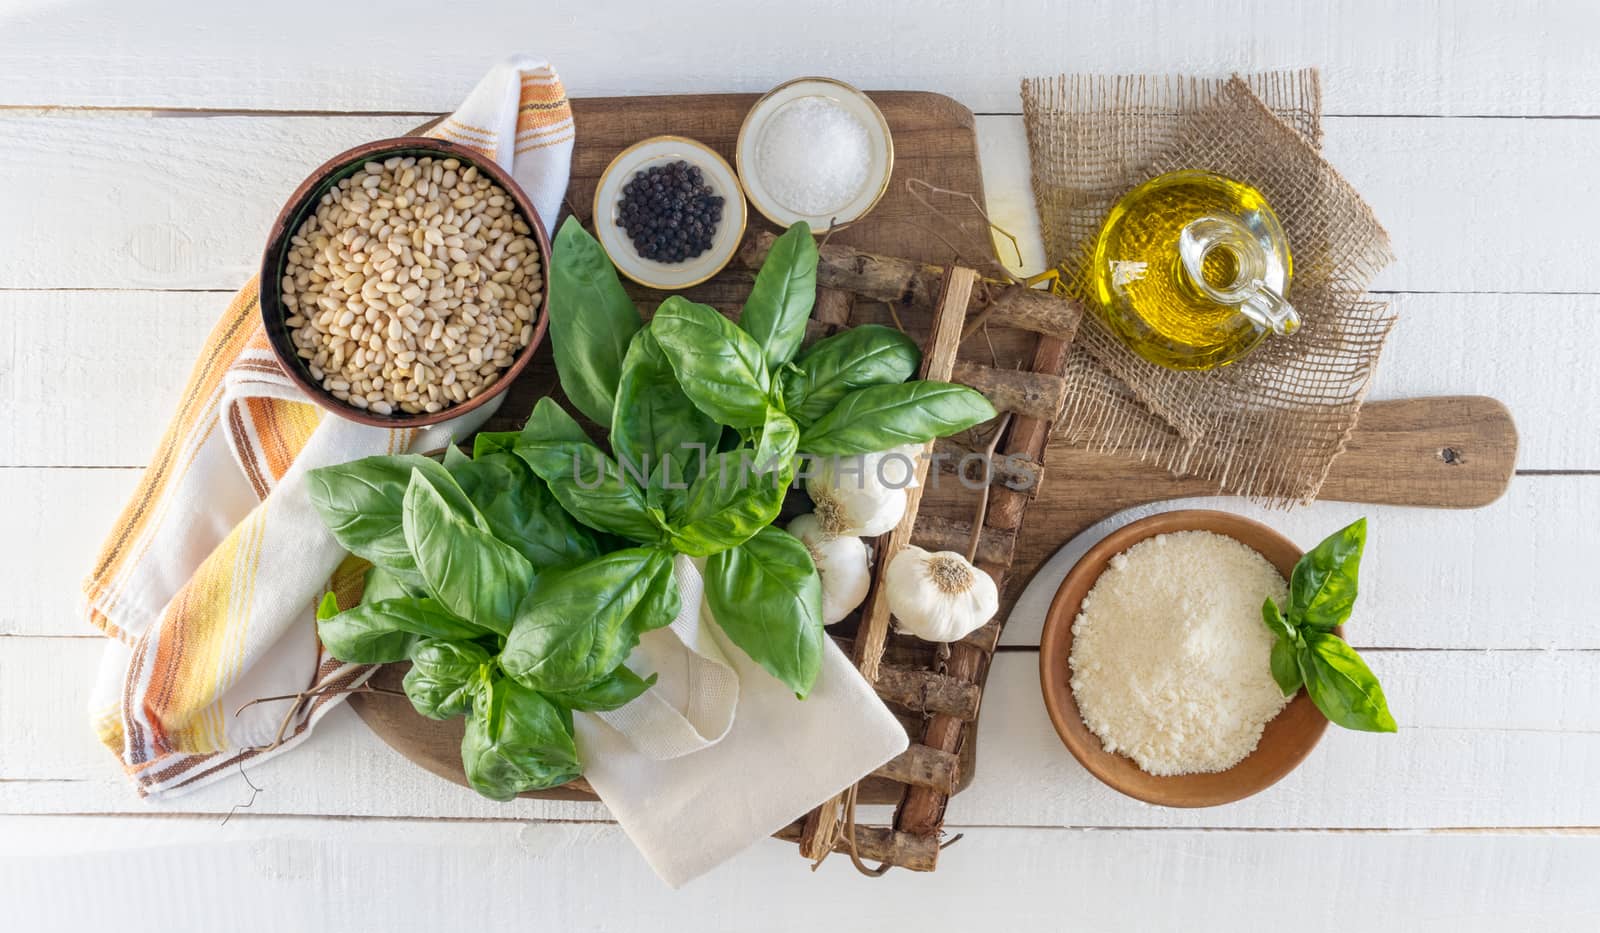 Fresh Pesto Ingredients on White Rustic Board by krisblackphotography